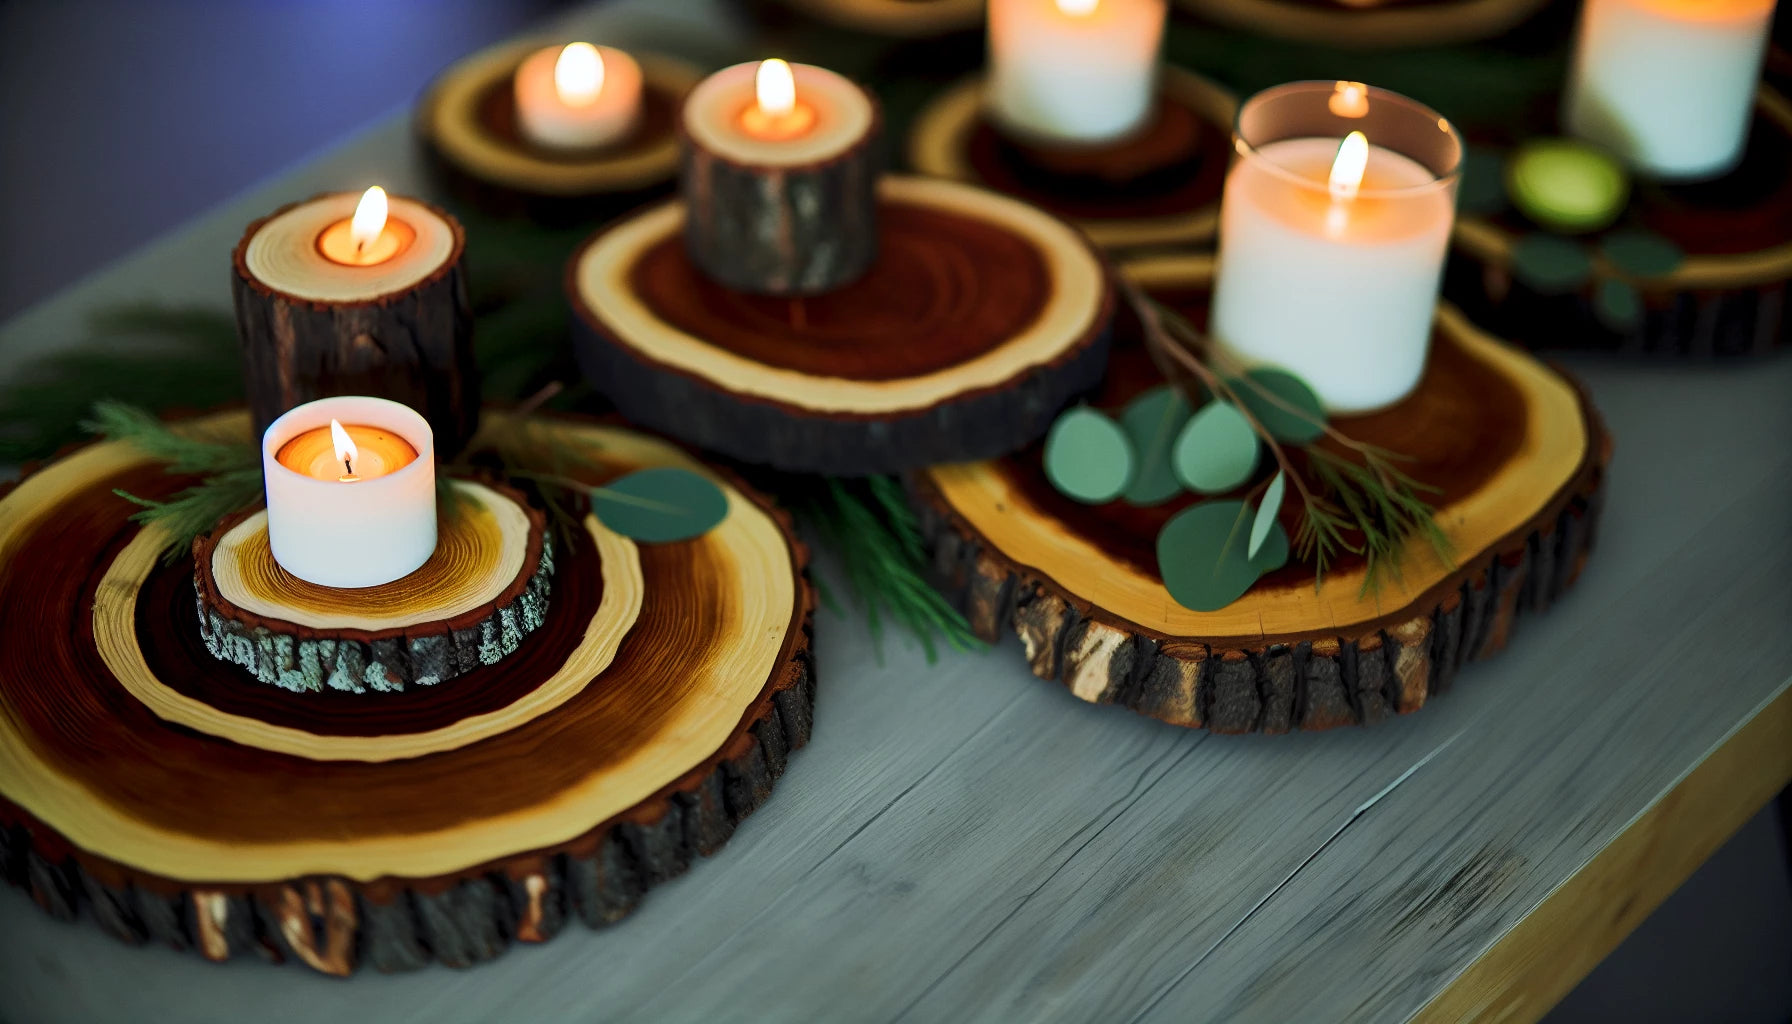 Rustic wood slices as base for DIY wedding centerpieces